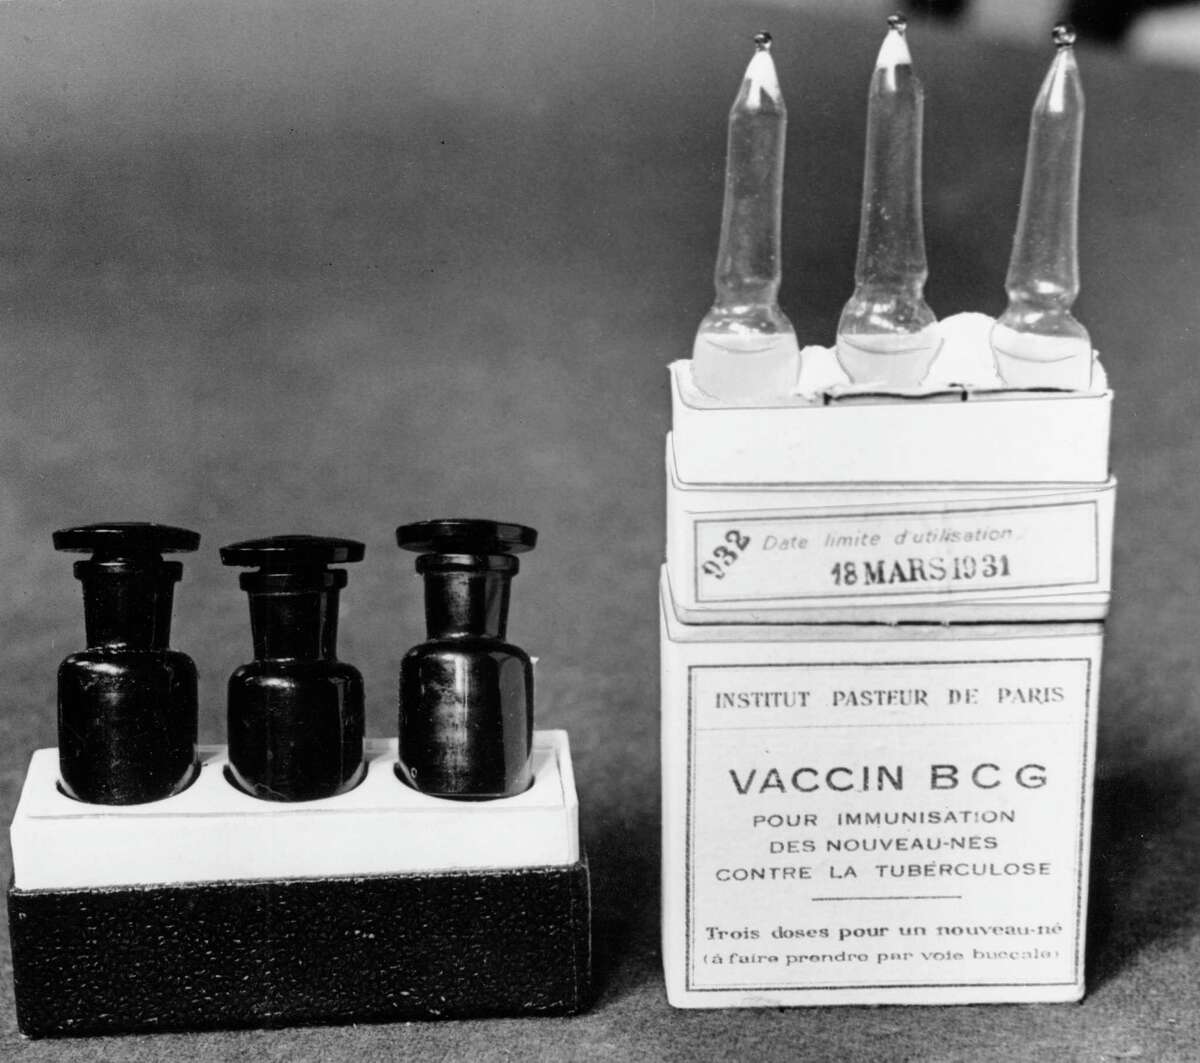 Scientists are dusting off some decades-old vaccines against TB and polio to see if they could provide stopgap protection against COVID-19 until a more precise shot arrives.This March 1931 file photo shows ampules of the BCG vaccine against tuberculosis in a laboratory at the Institute Pasteur in Paris, France.